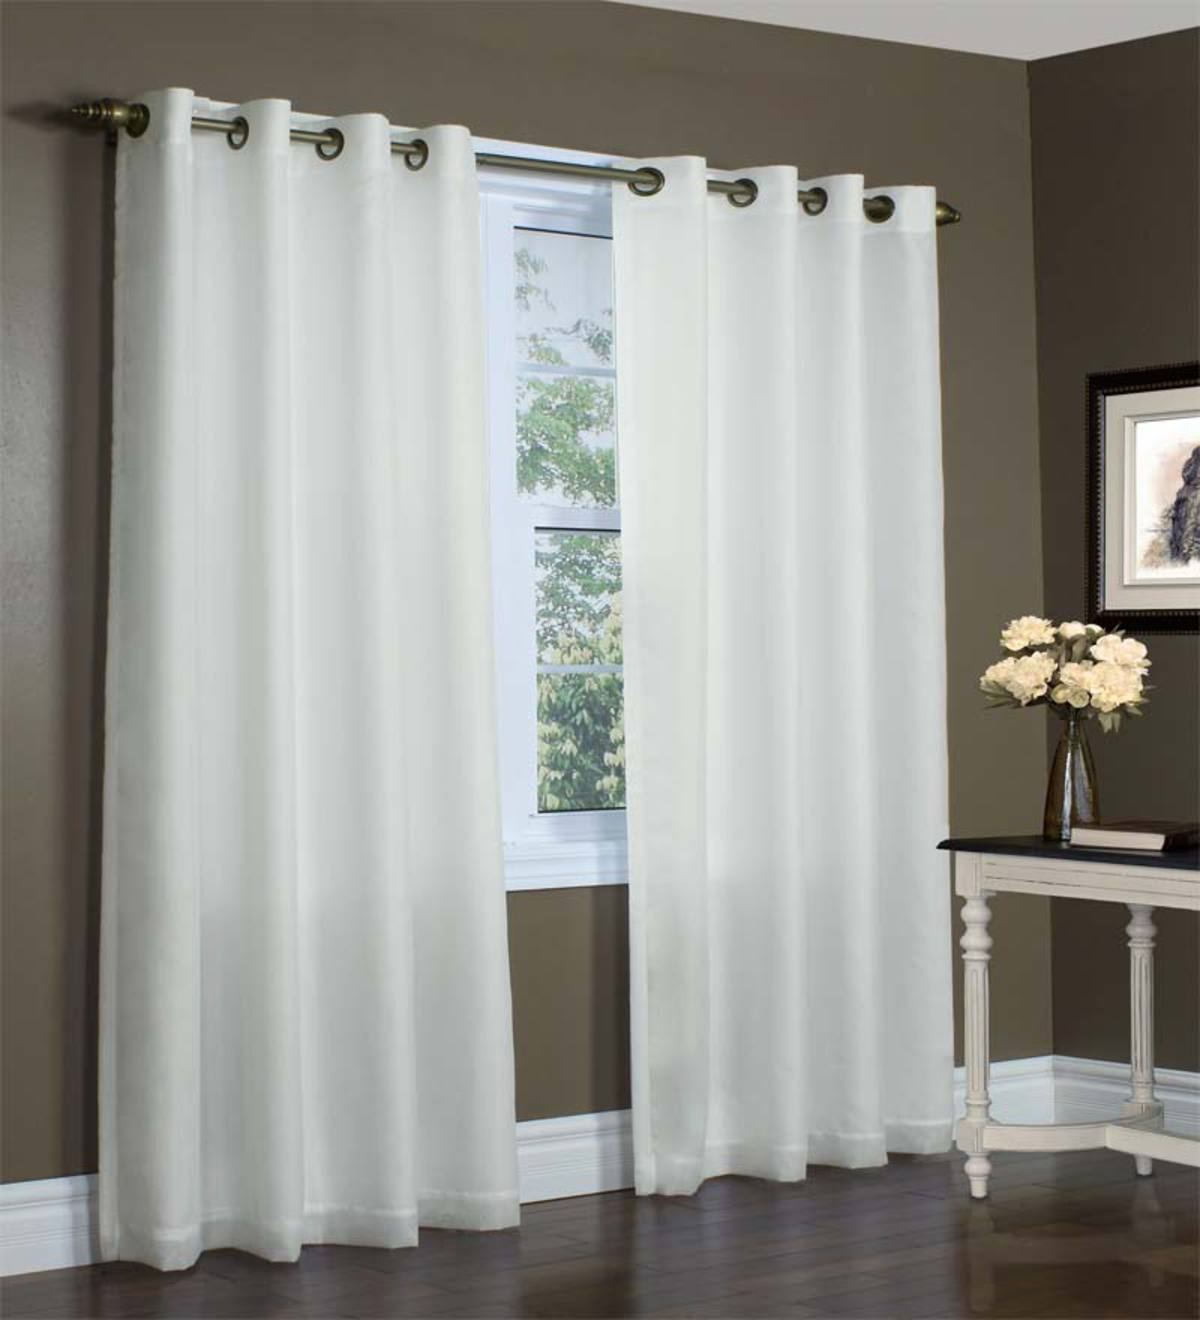 54"W x 95"L Thermovoile Lined Grommet-Top European-Style Voile Panel